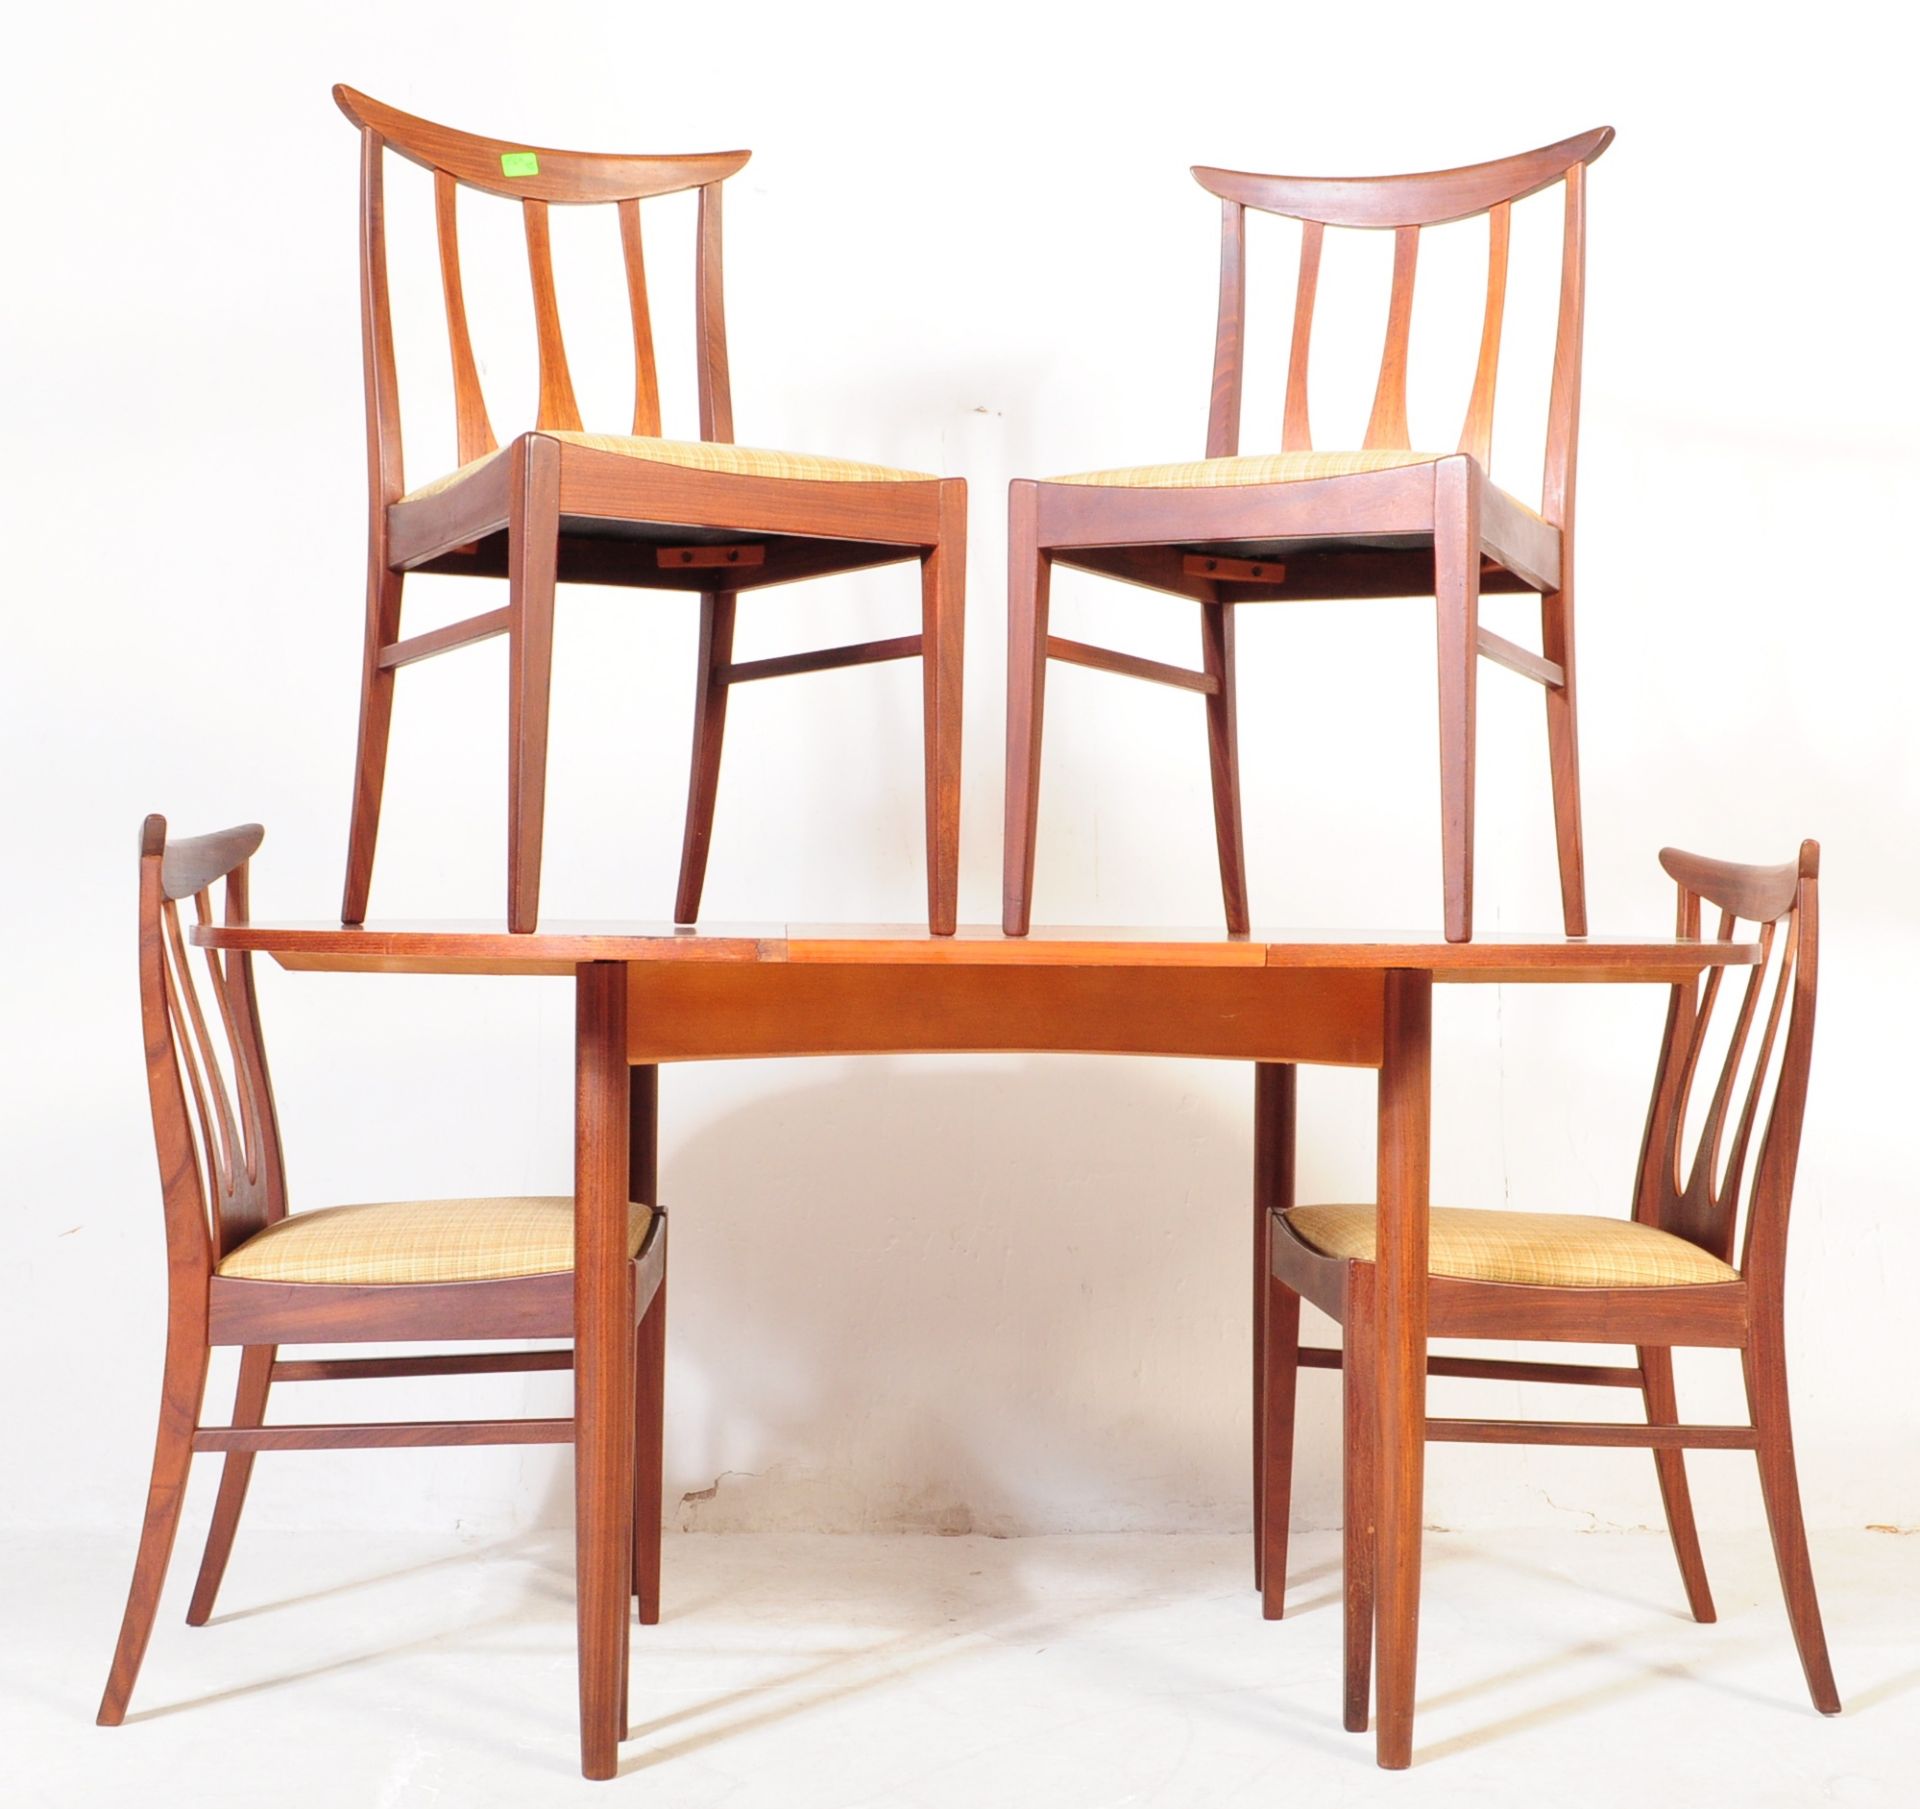 G PLAN - BRASILIAN RANGE - 1960S DINING TABLE AND SIX CHAIRS